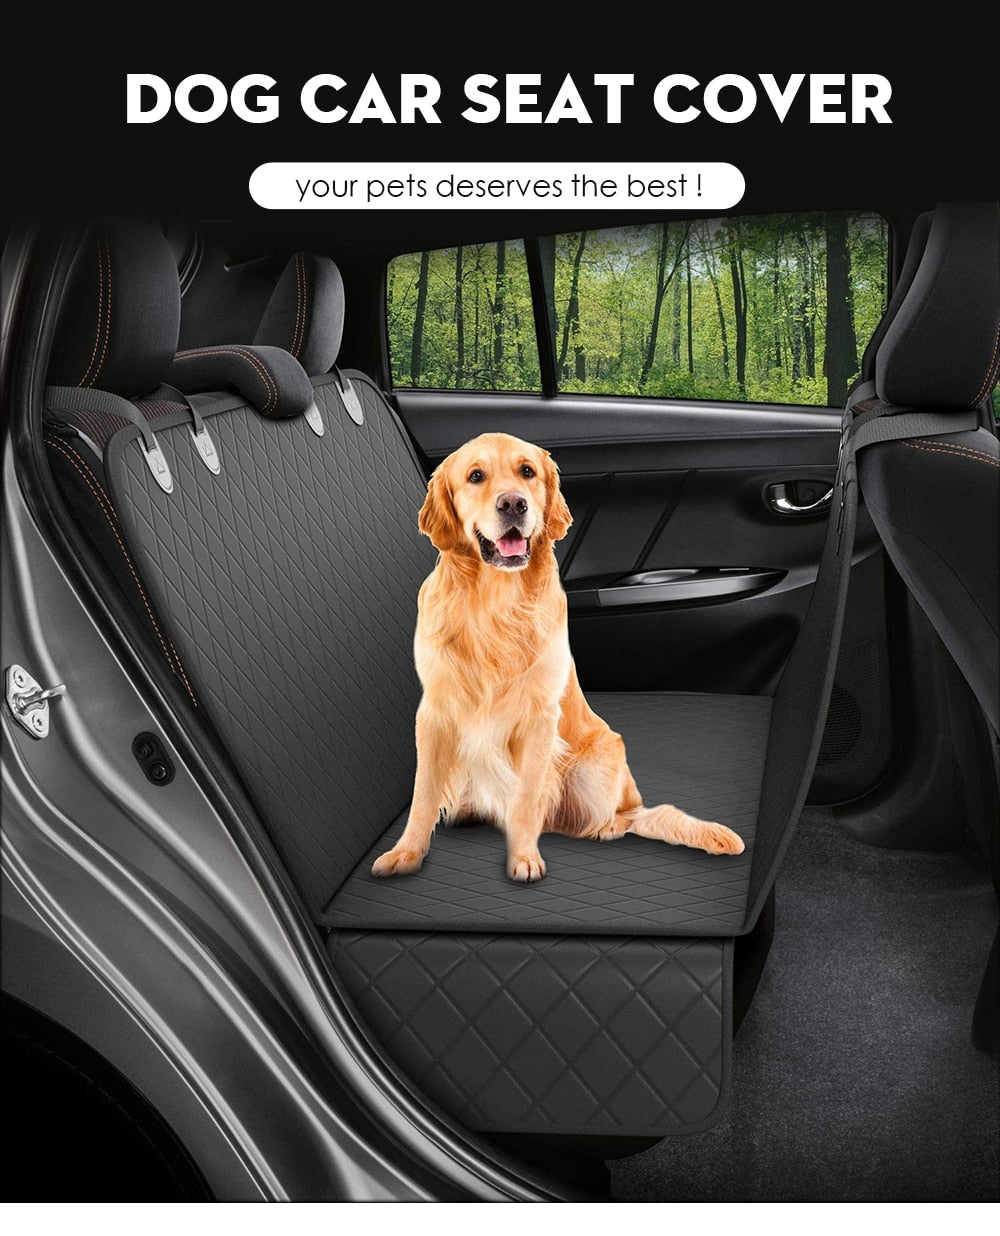 Dog Car Seat Cover View Mesh Pet Carrier Hammock